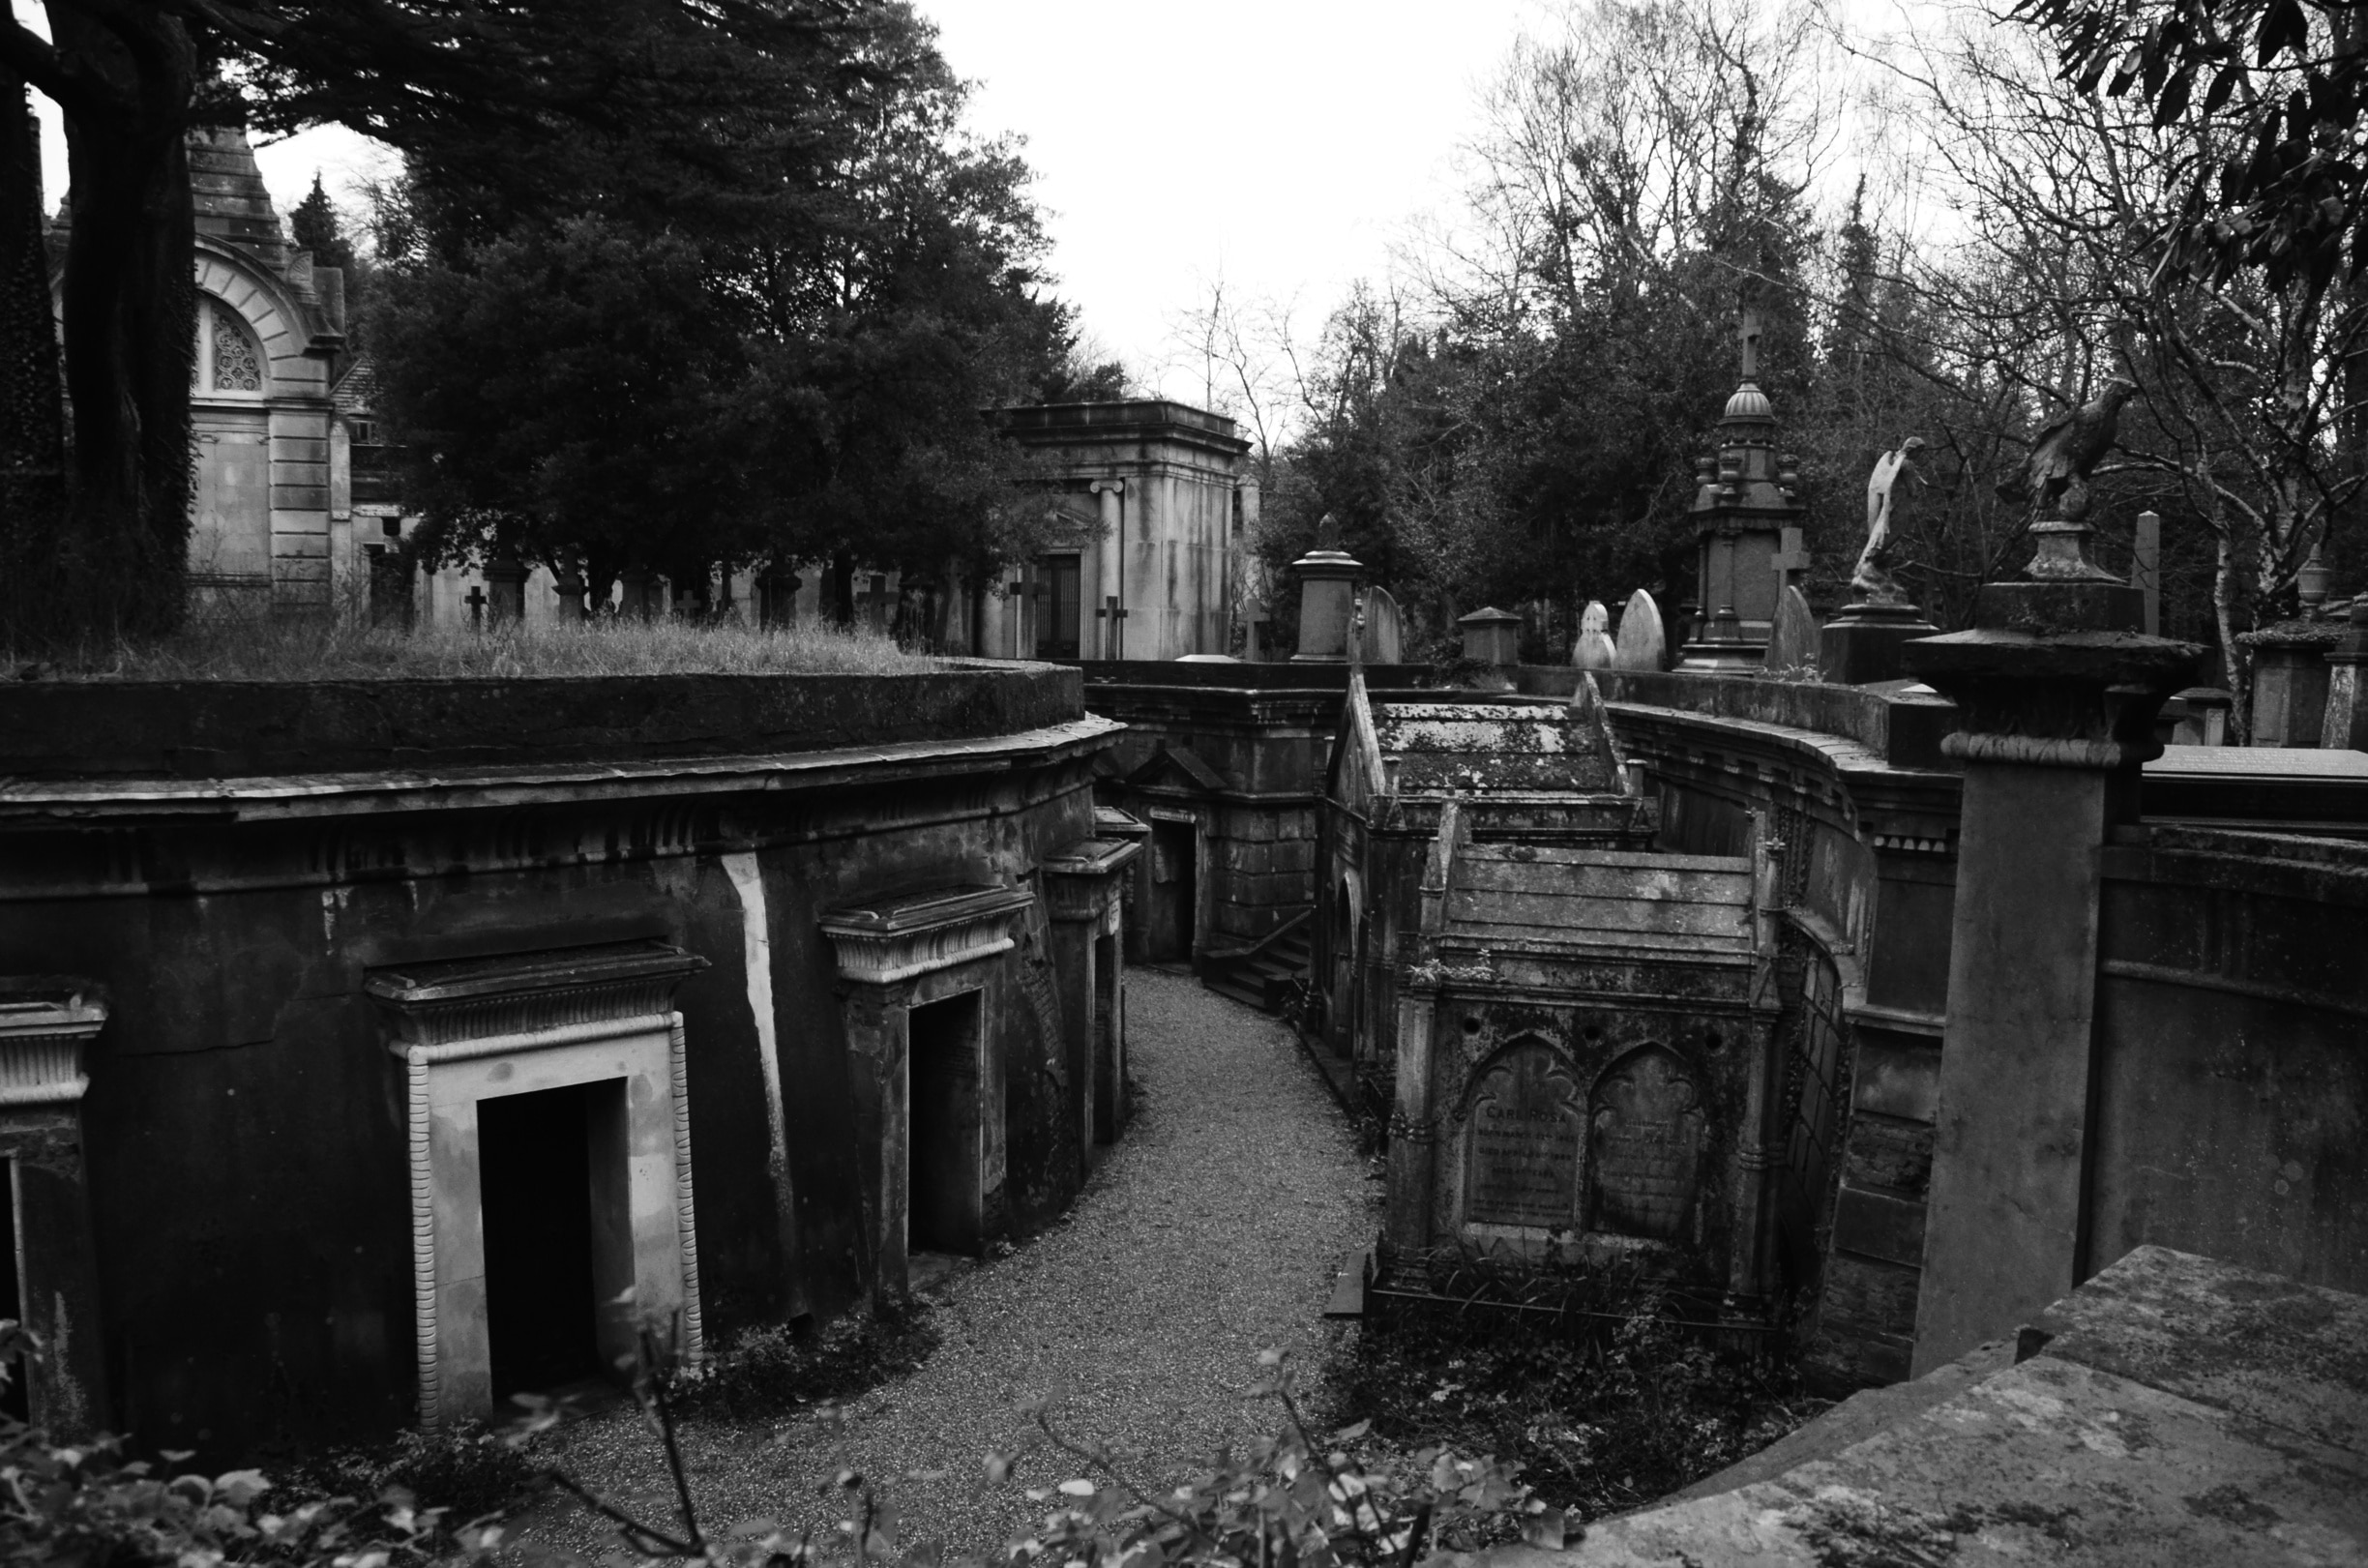 Great place to walk around. Take the guided tour and see the crypts and learn all about the meanings of the features that can be seen on the grave stones. Go celebrity spotting as there are plenty buried here.